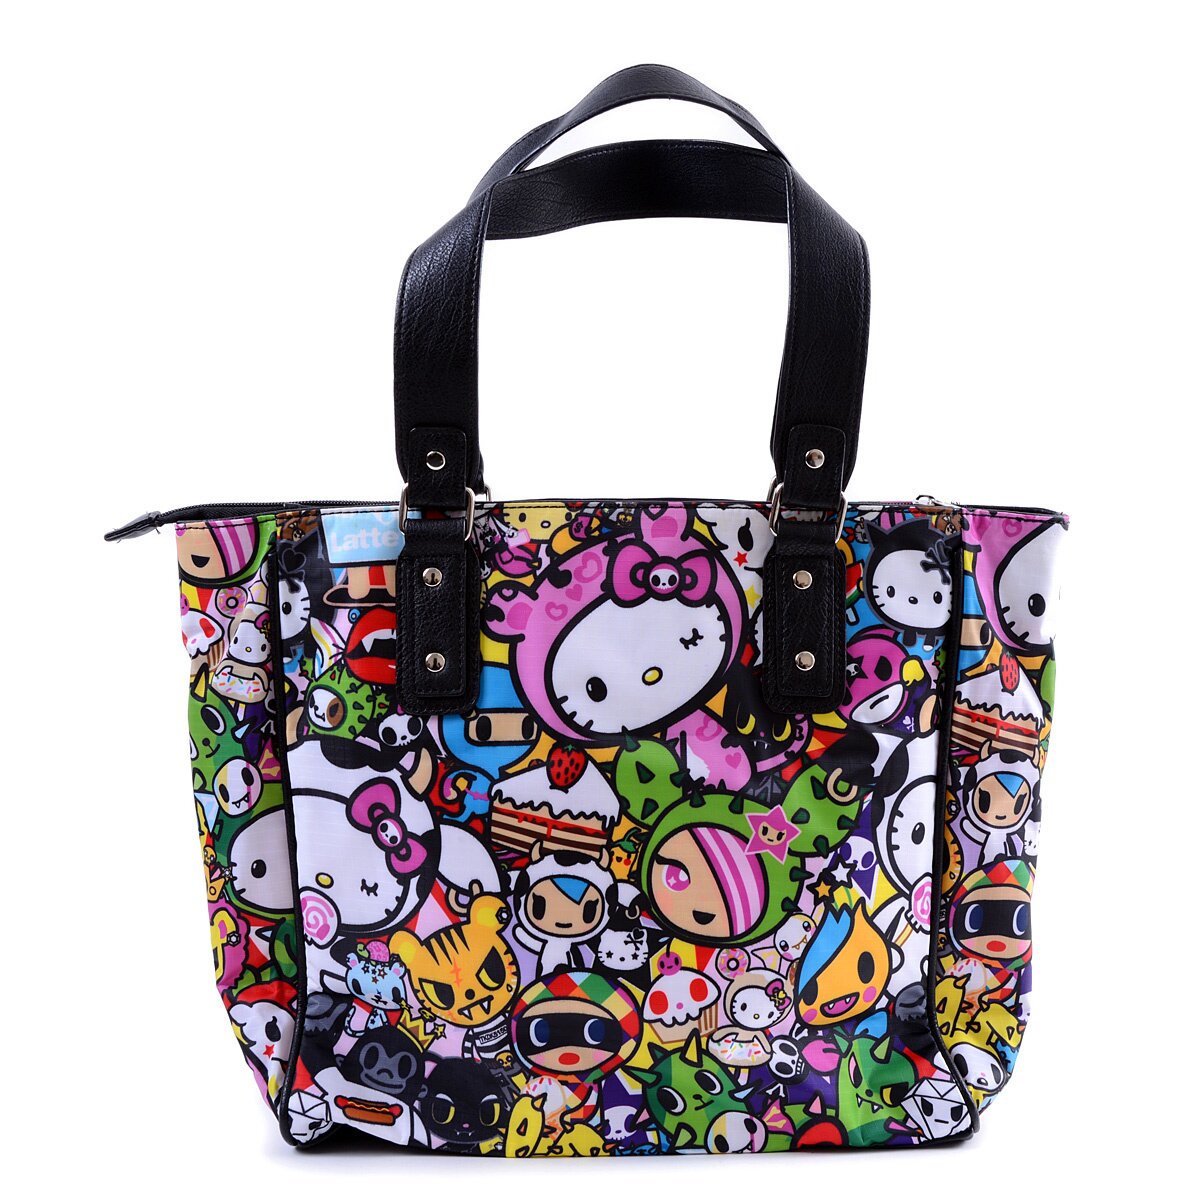 Hello Kitty Limited Edition Shoulder Bags